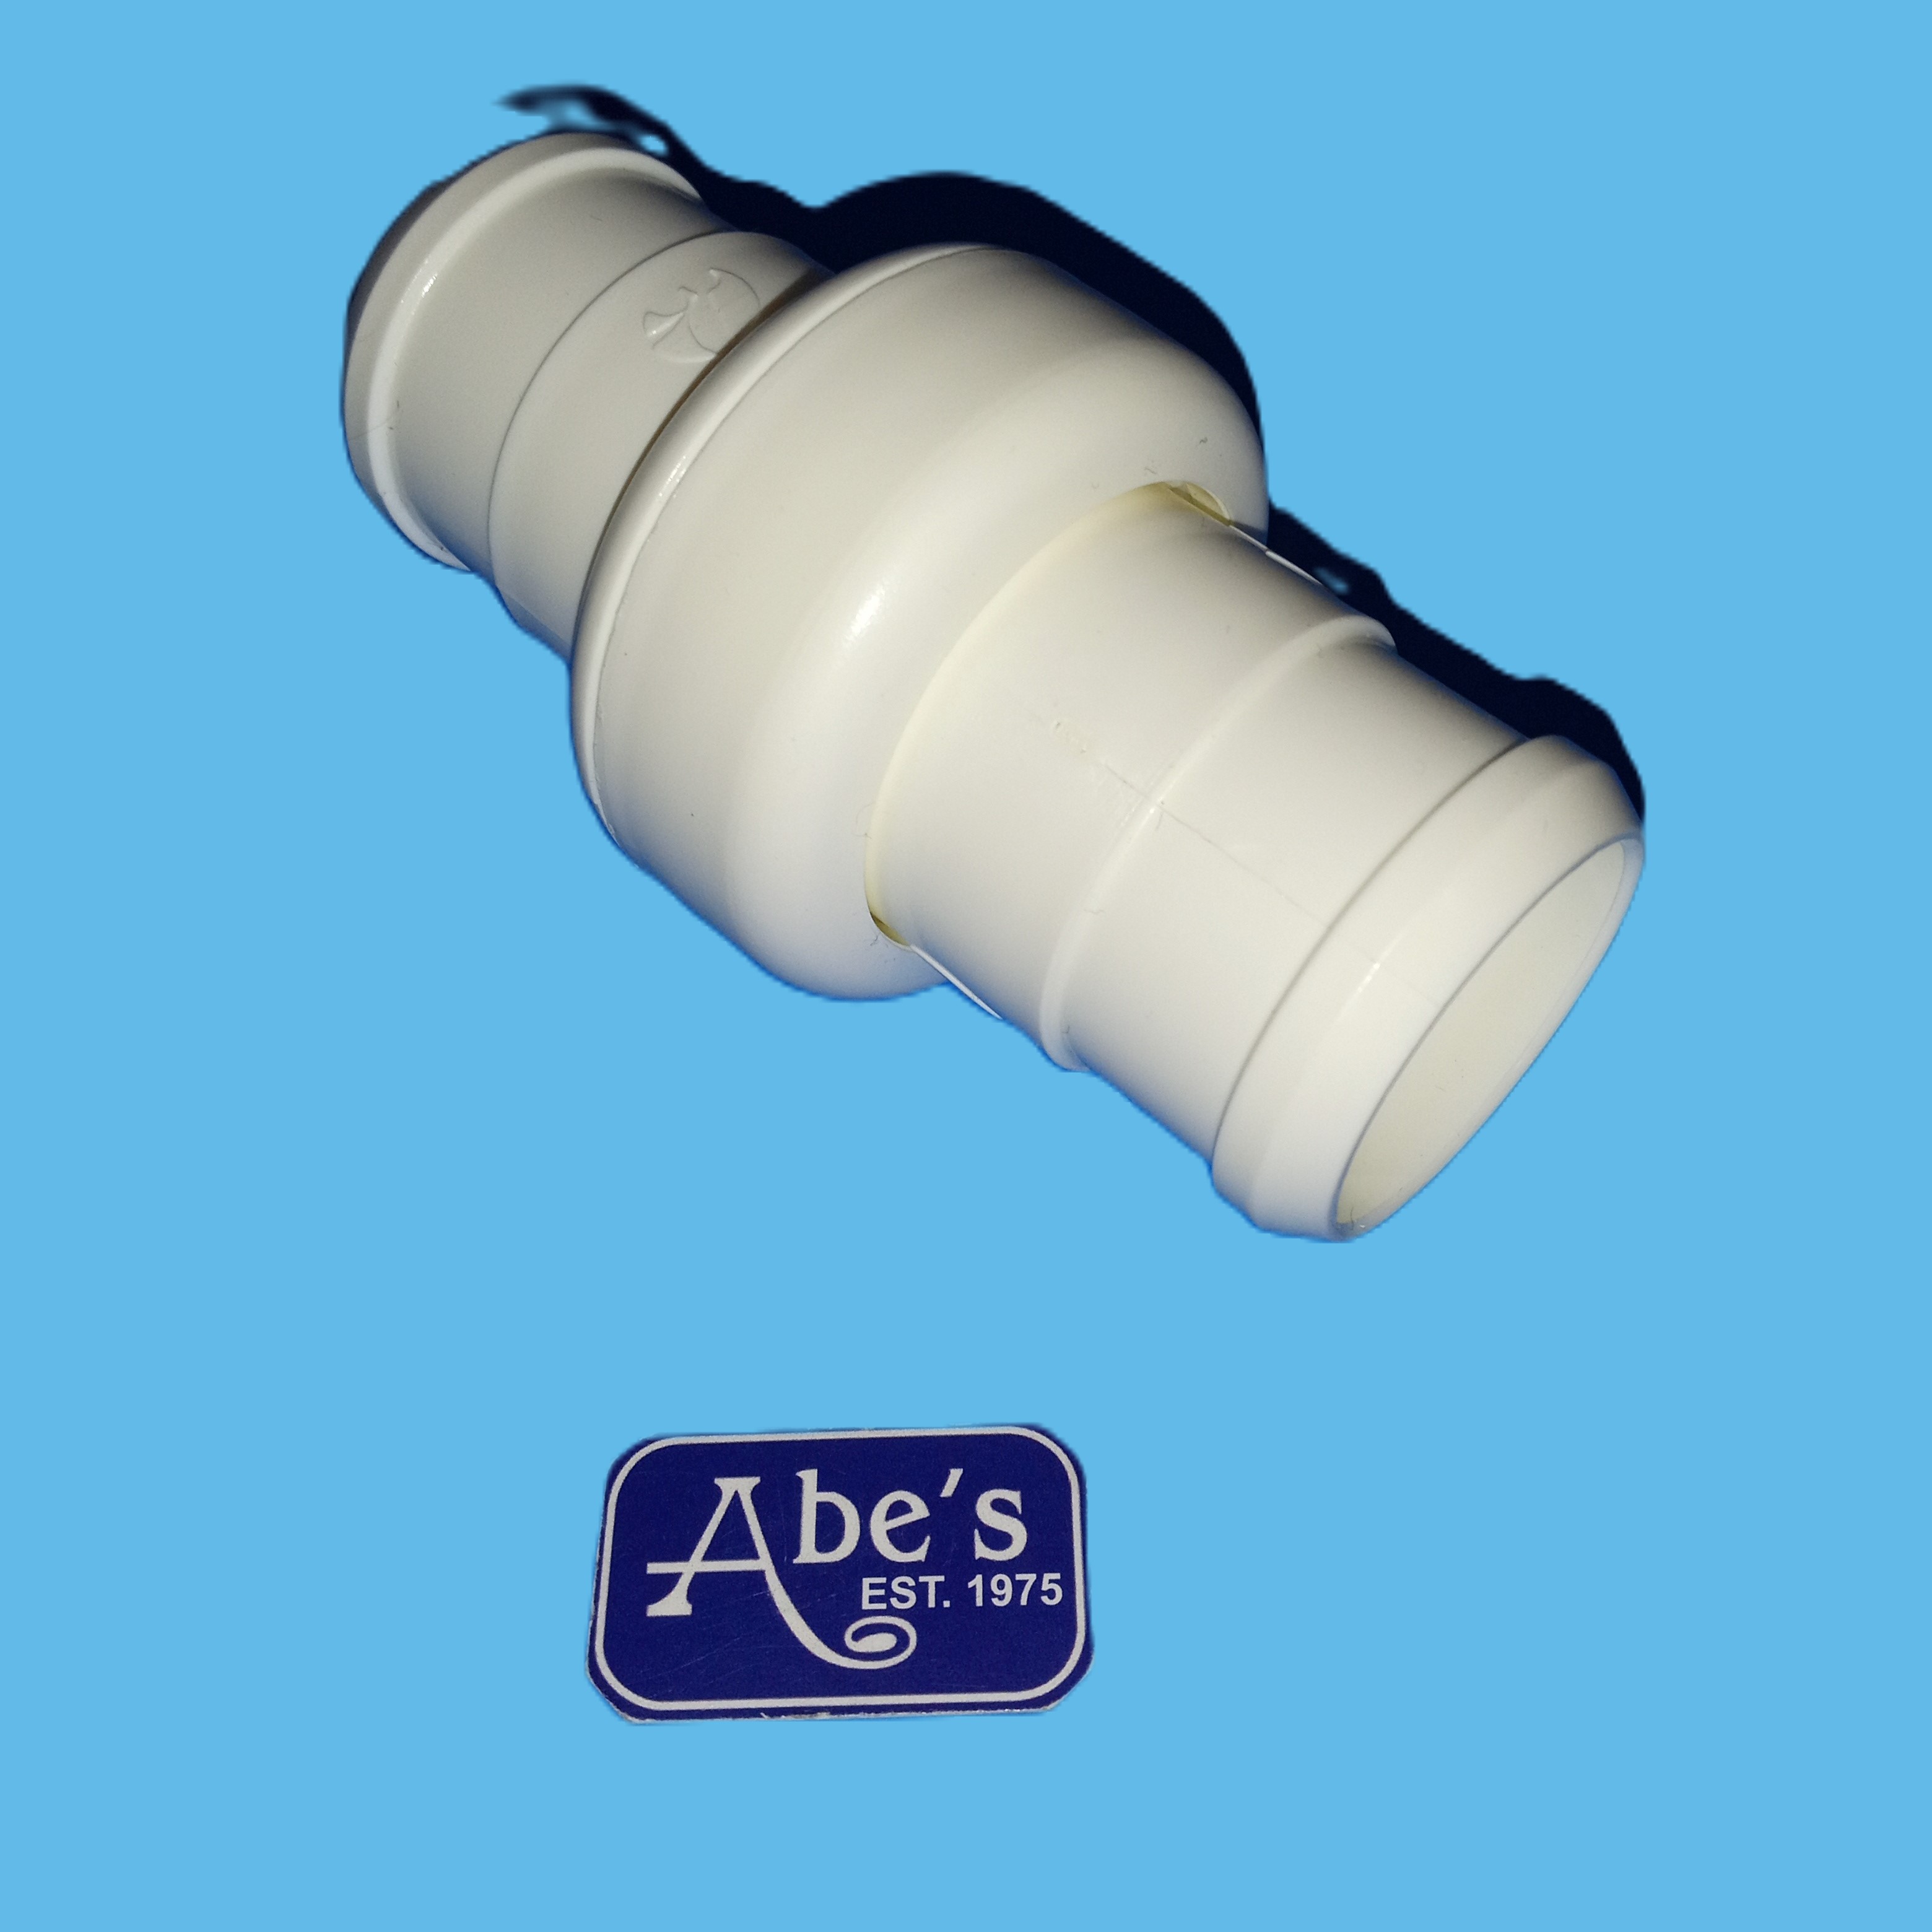 Polaris Hose Swivel for Polaris Vac-Sweep Cleaners / 9-100-3002 / Affordable $20.75 / Hard to Find Pool cleaner parts? Find Hard to Find Parts at Abe's Pools & Spas